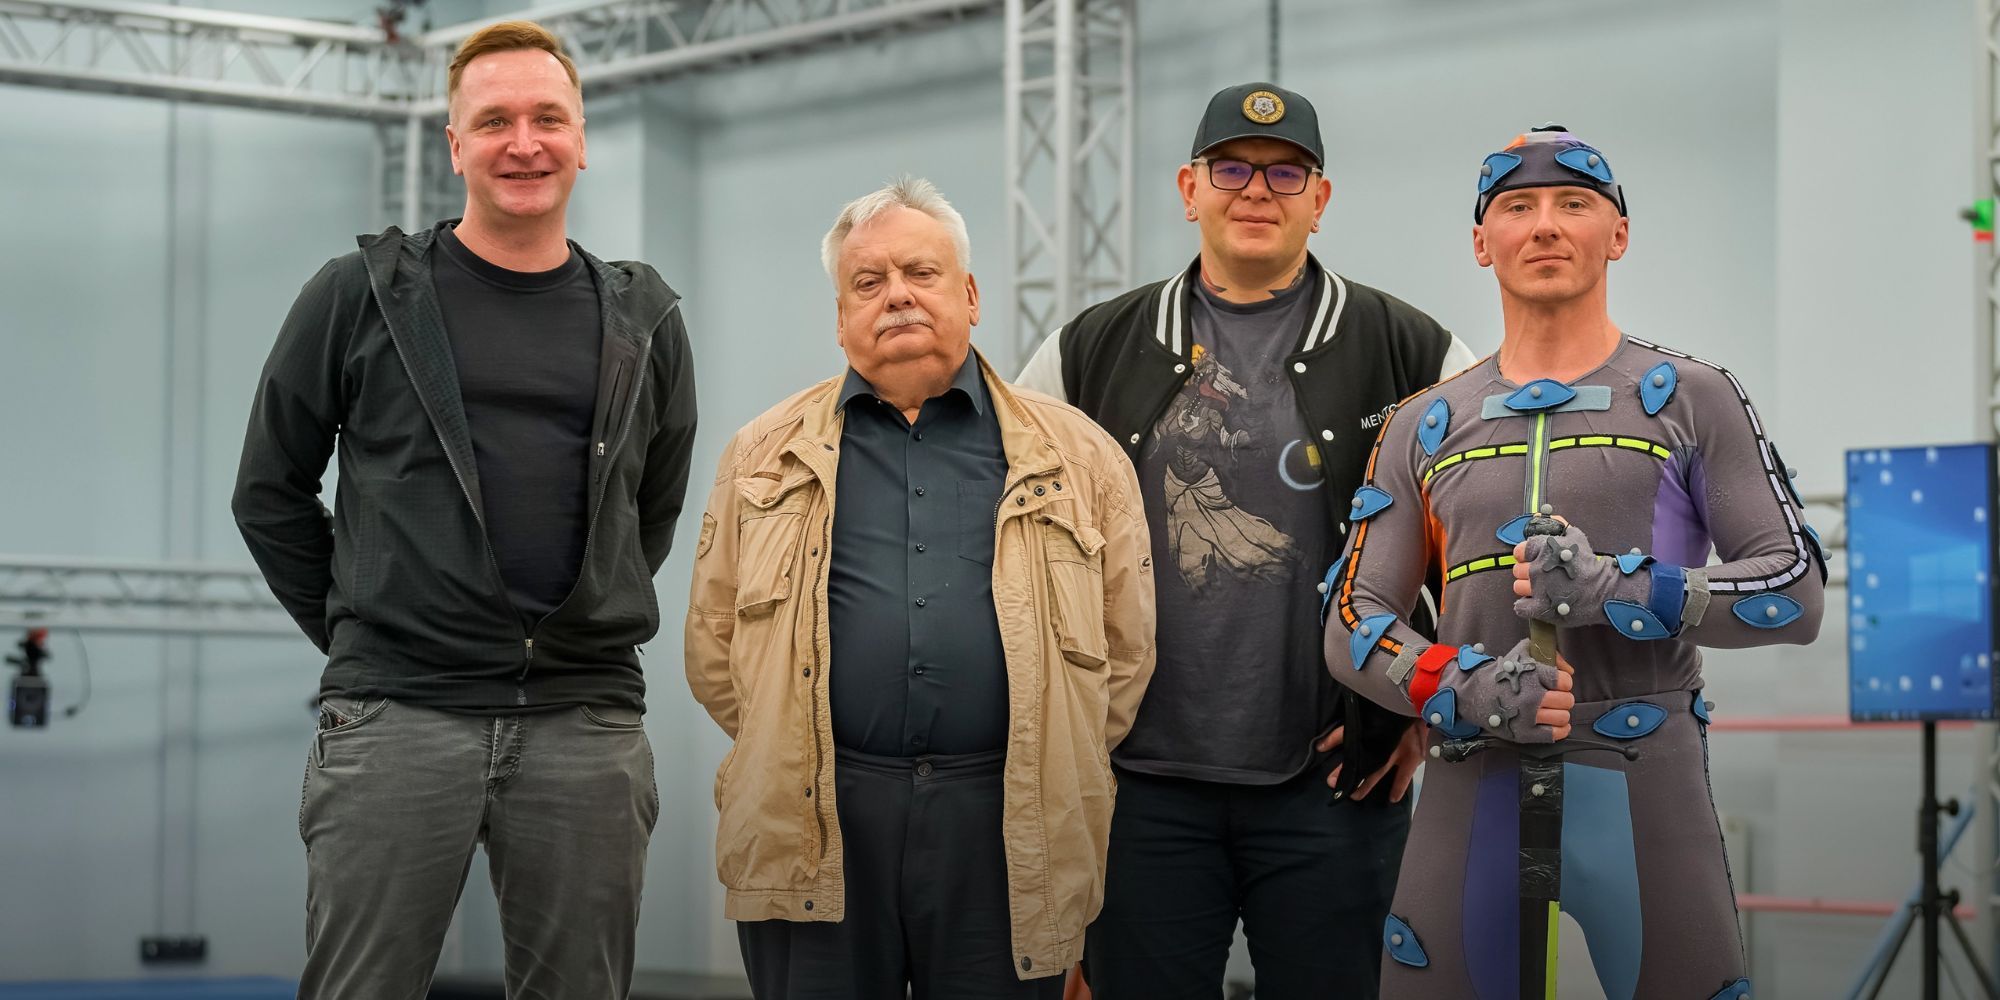 The Witcher author Andrzej Sapkowski visits CD Projekt Red. He poses with an actor in mocap, holding a prop sword.